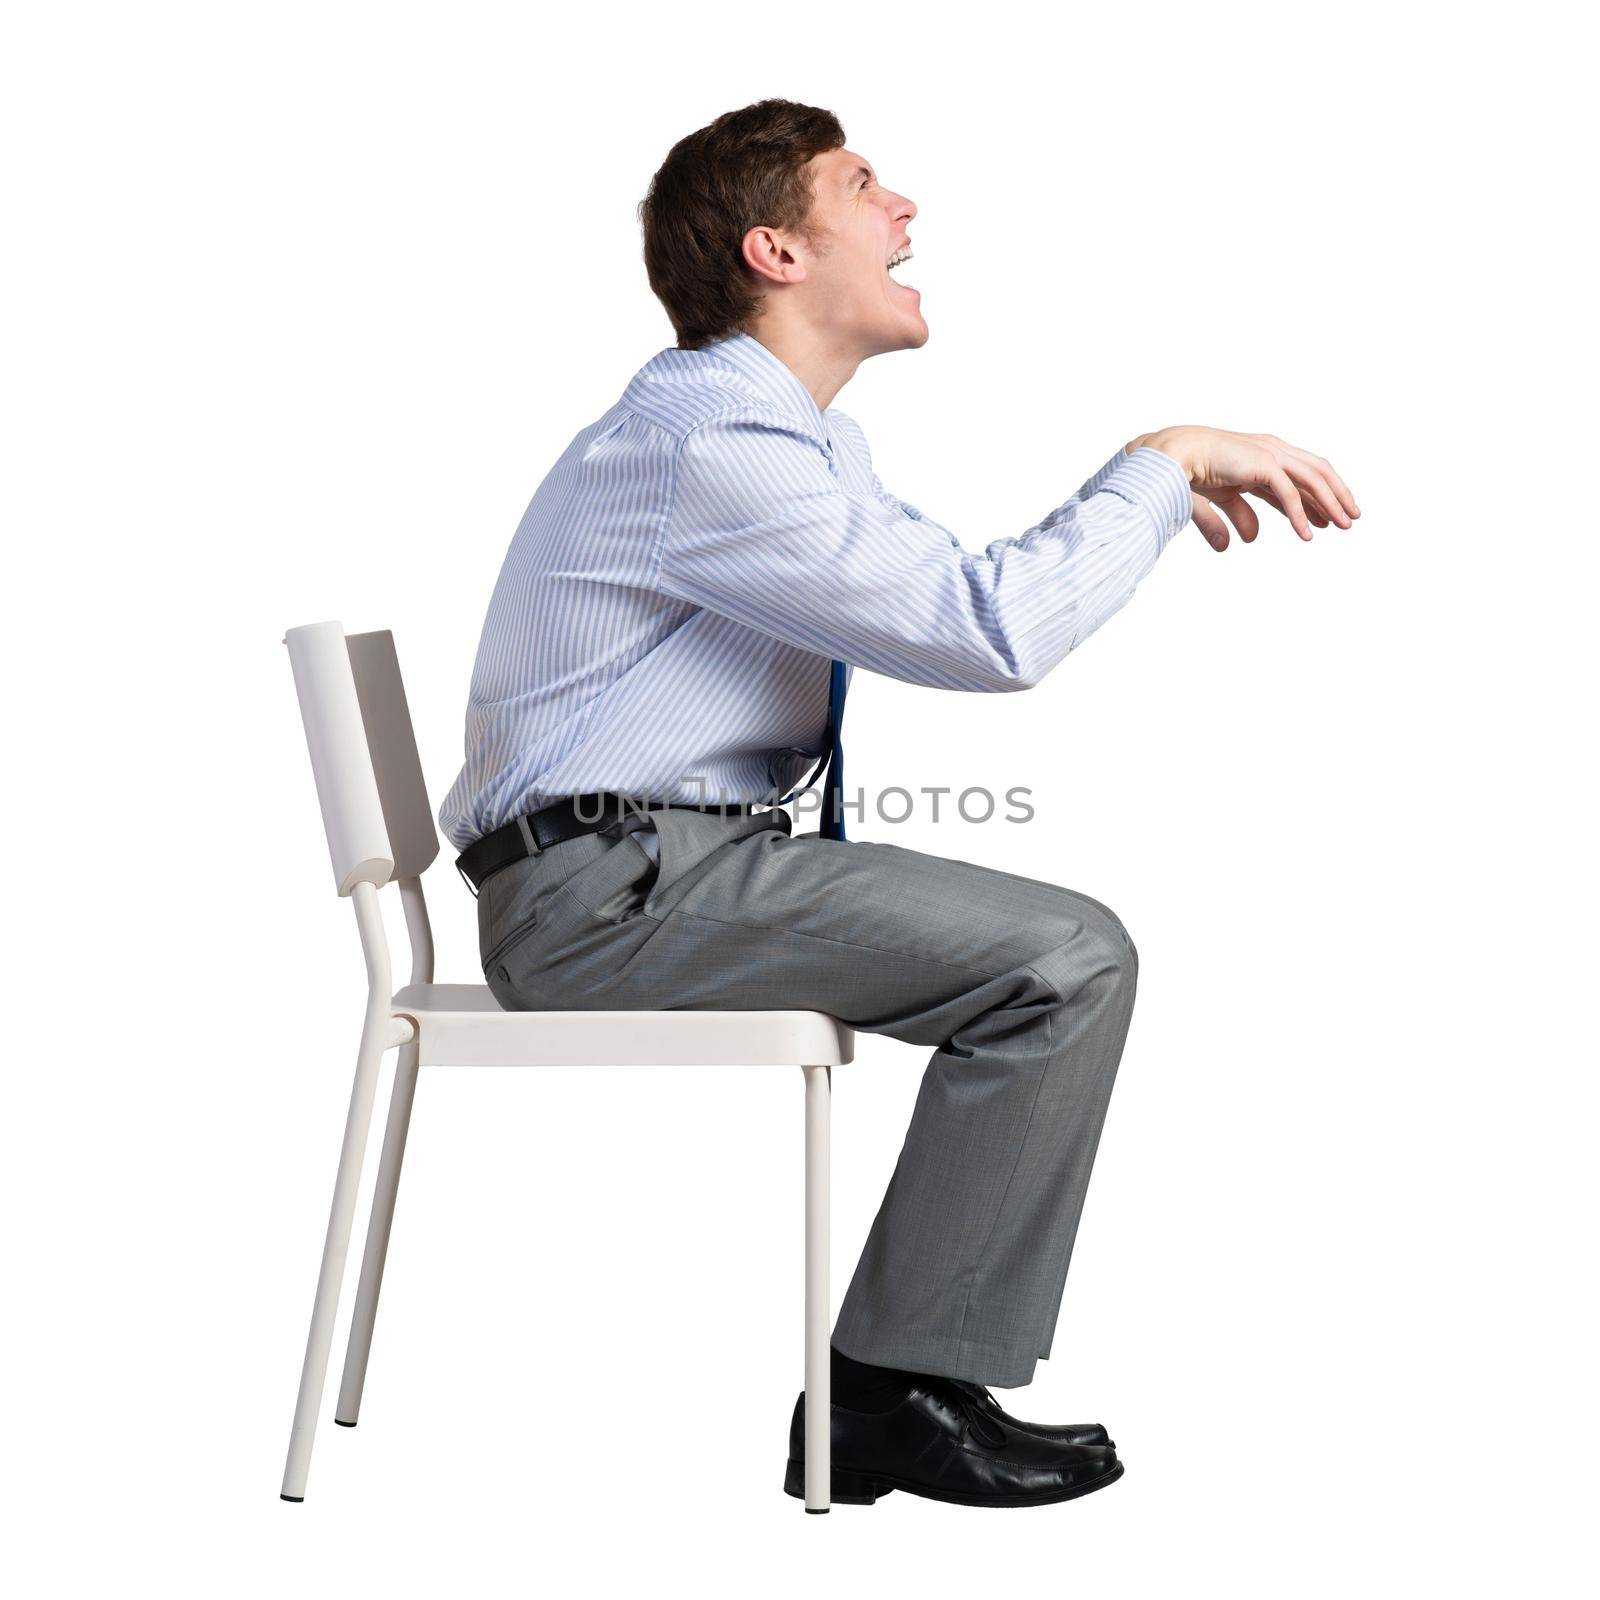 businessman sits on a chair by adam121